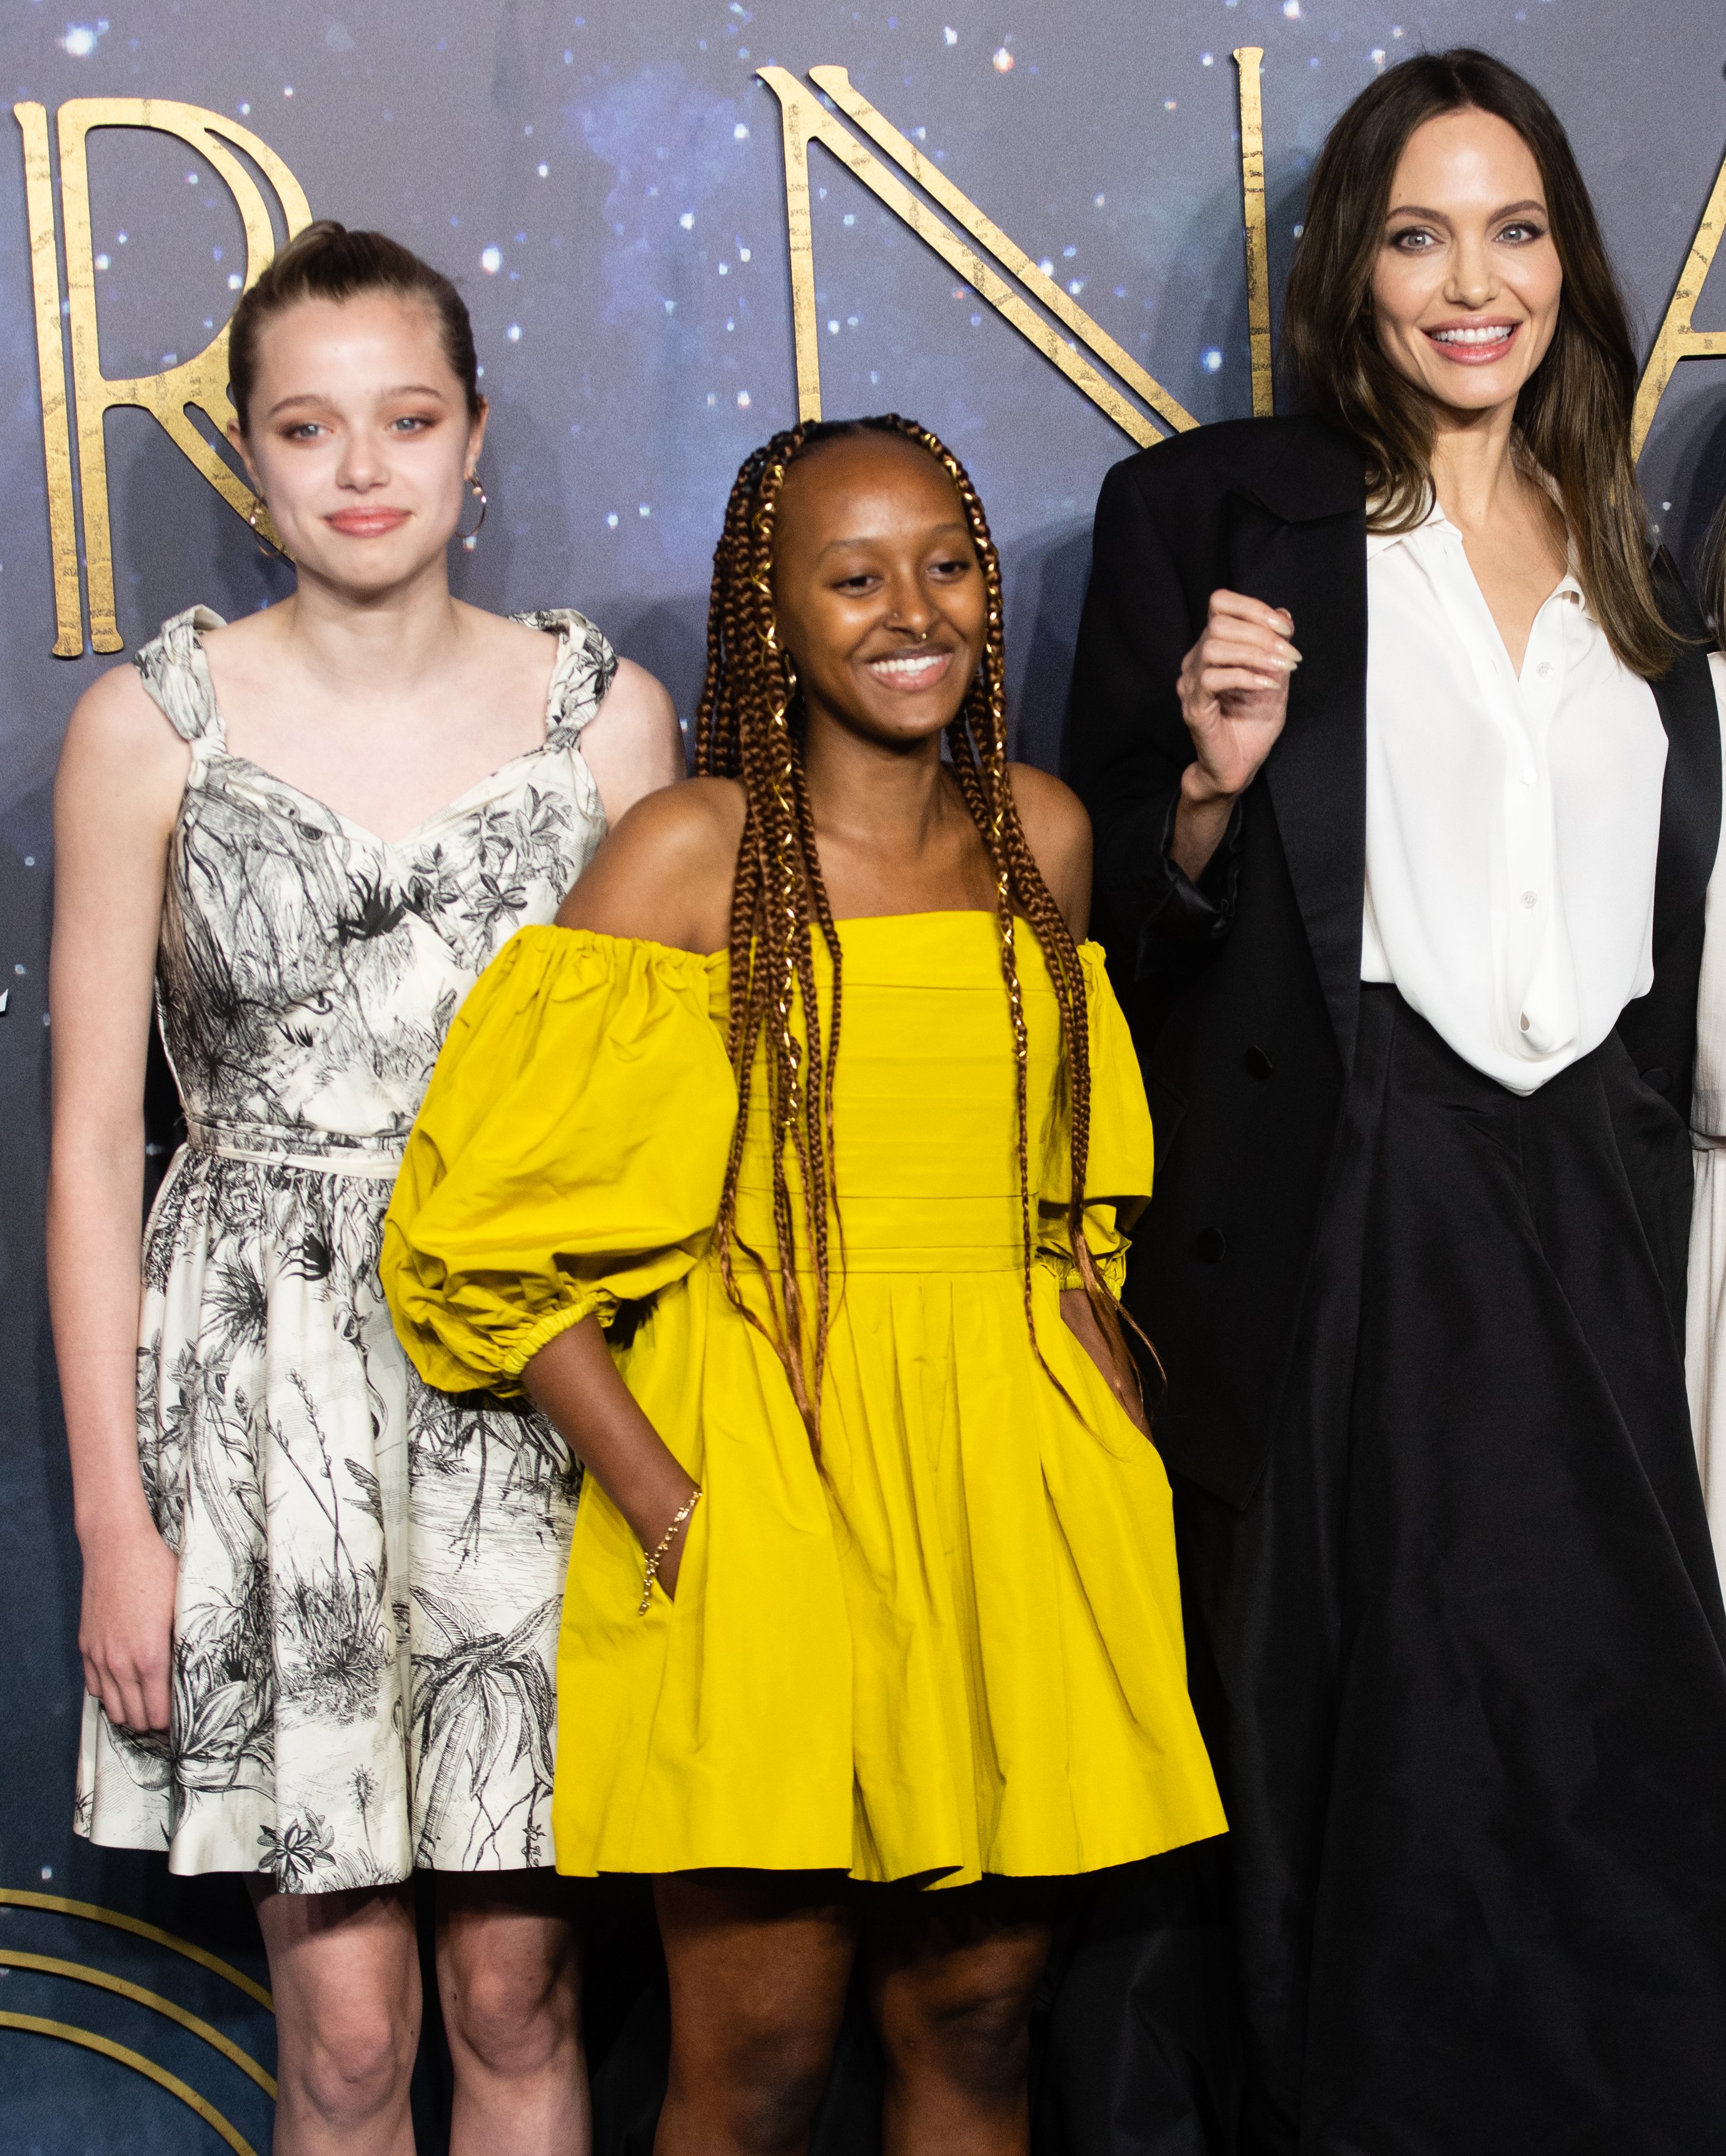 Shiloh Jolie-Pitt, Zahara Jolie-Pitt, and Angelina Jolie at\\u00a0the "Eternals" UK premiere on October 27, 2021, in London, England | Source: Getty Images